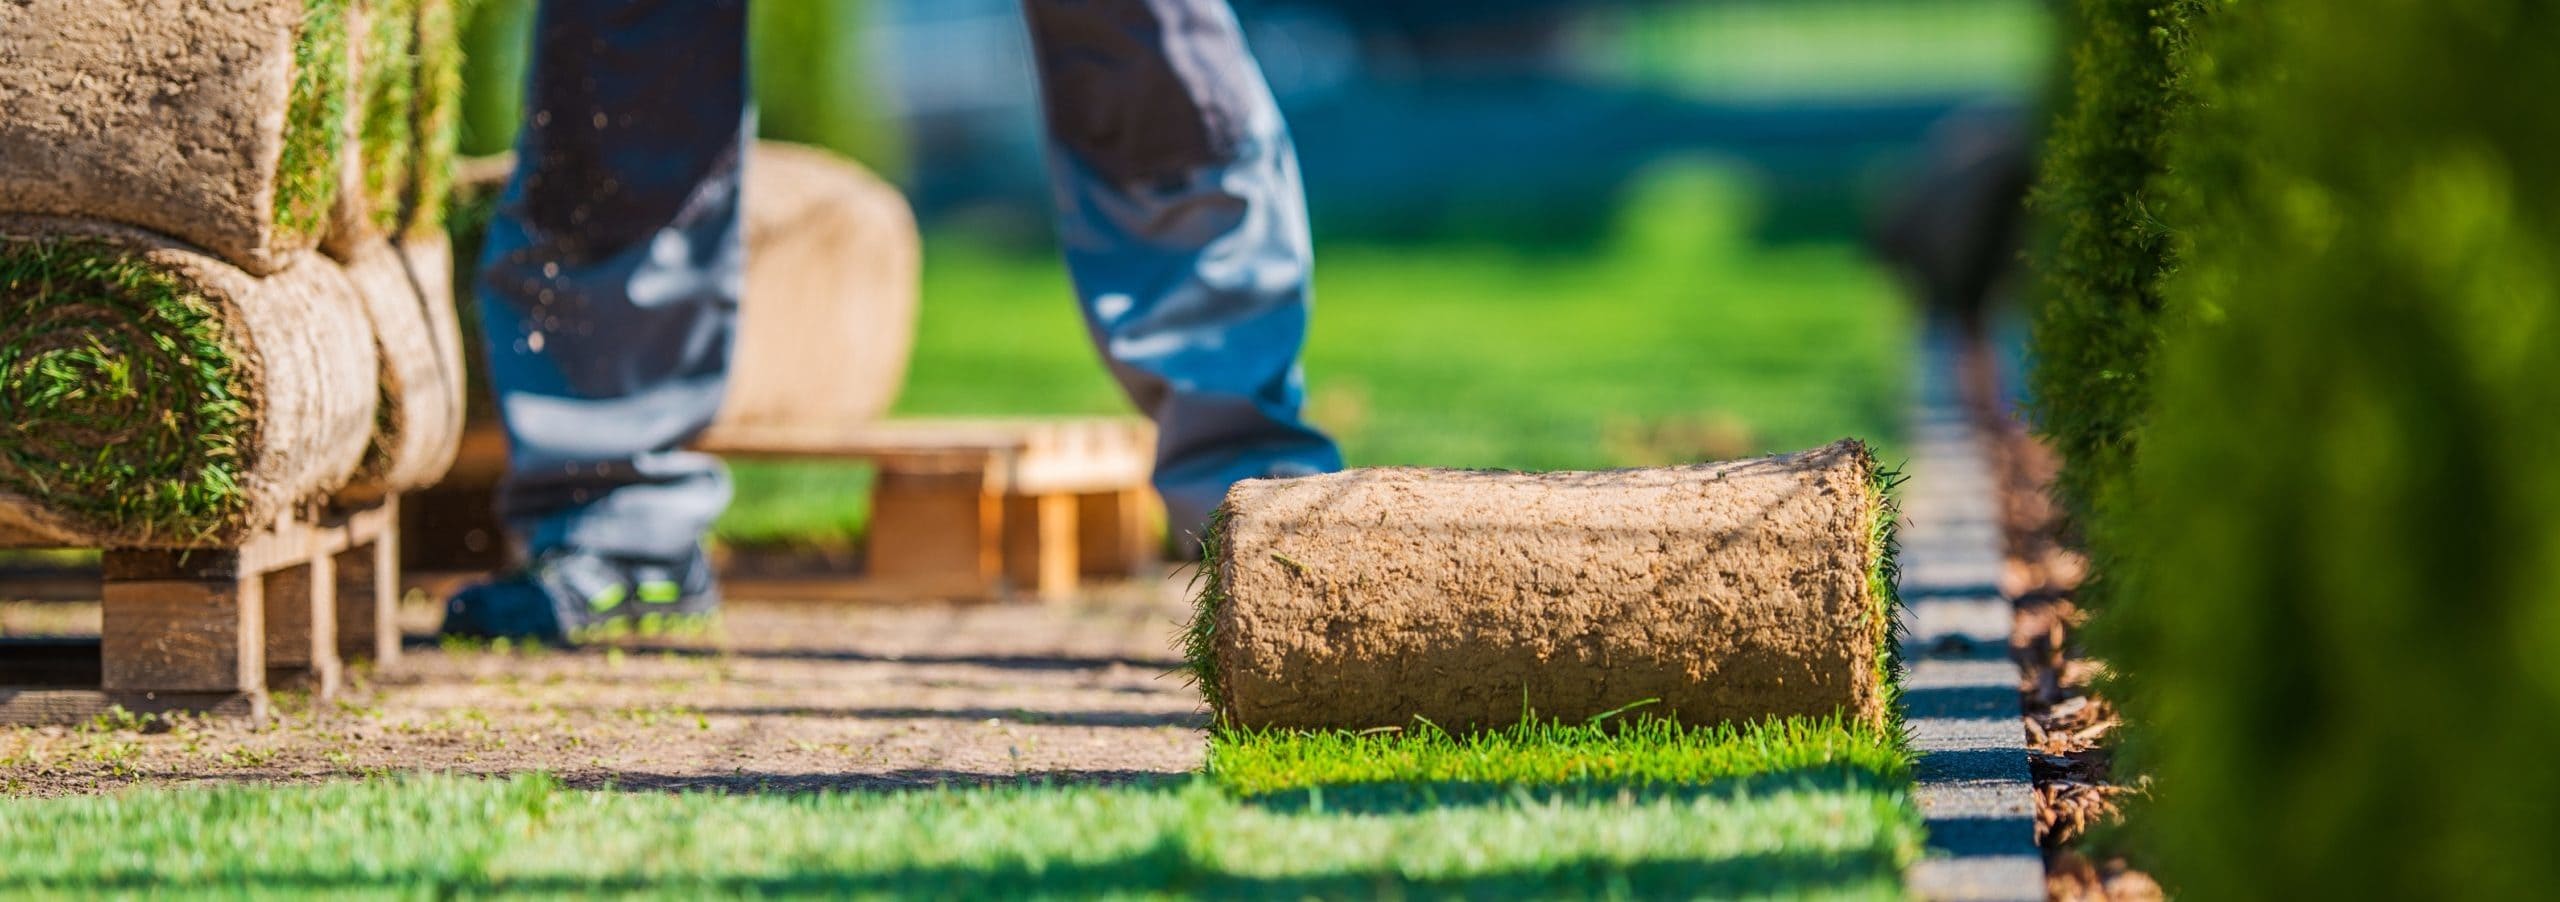 laying sod with legs shutterstock_693908044